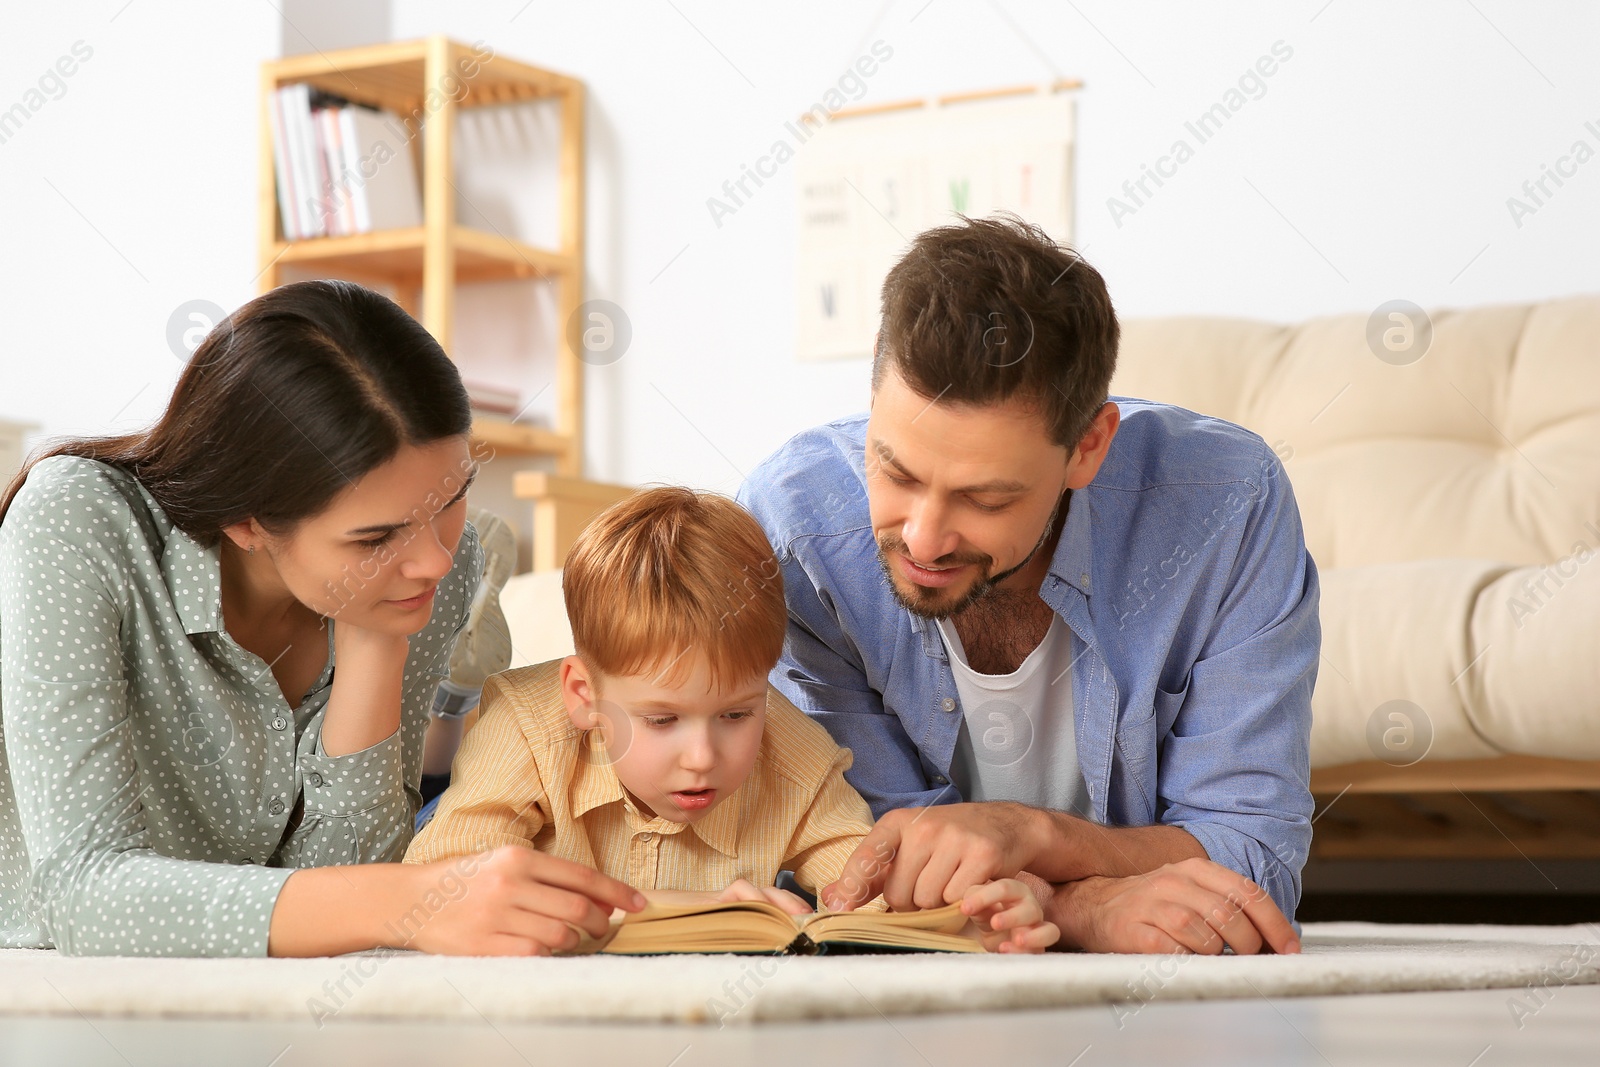 Photo of Happy family reading book together on floor in living room at home